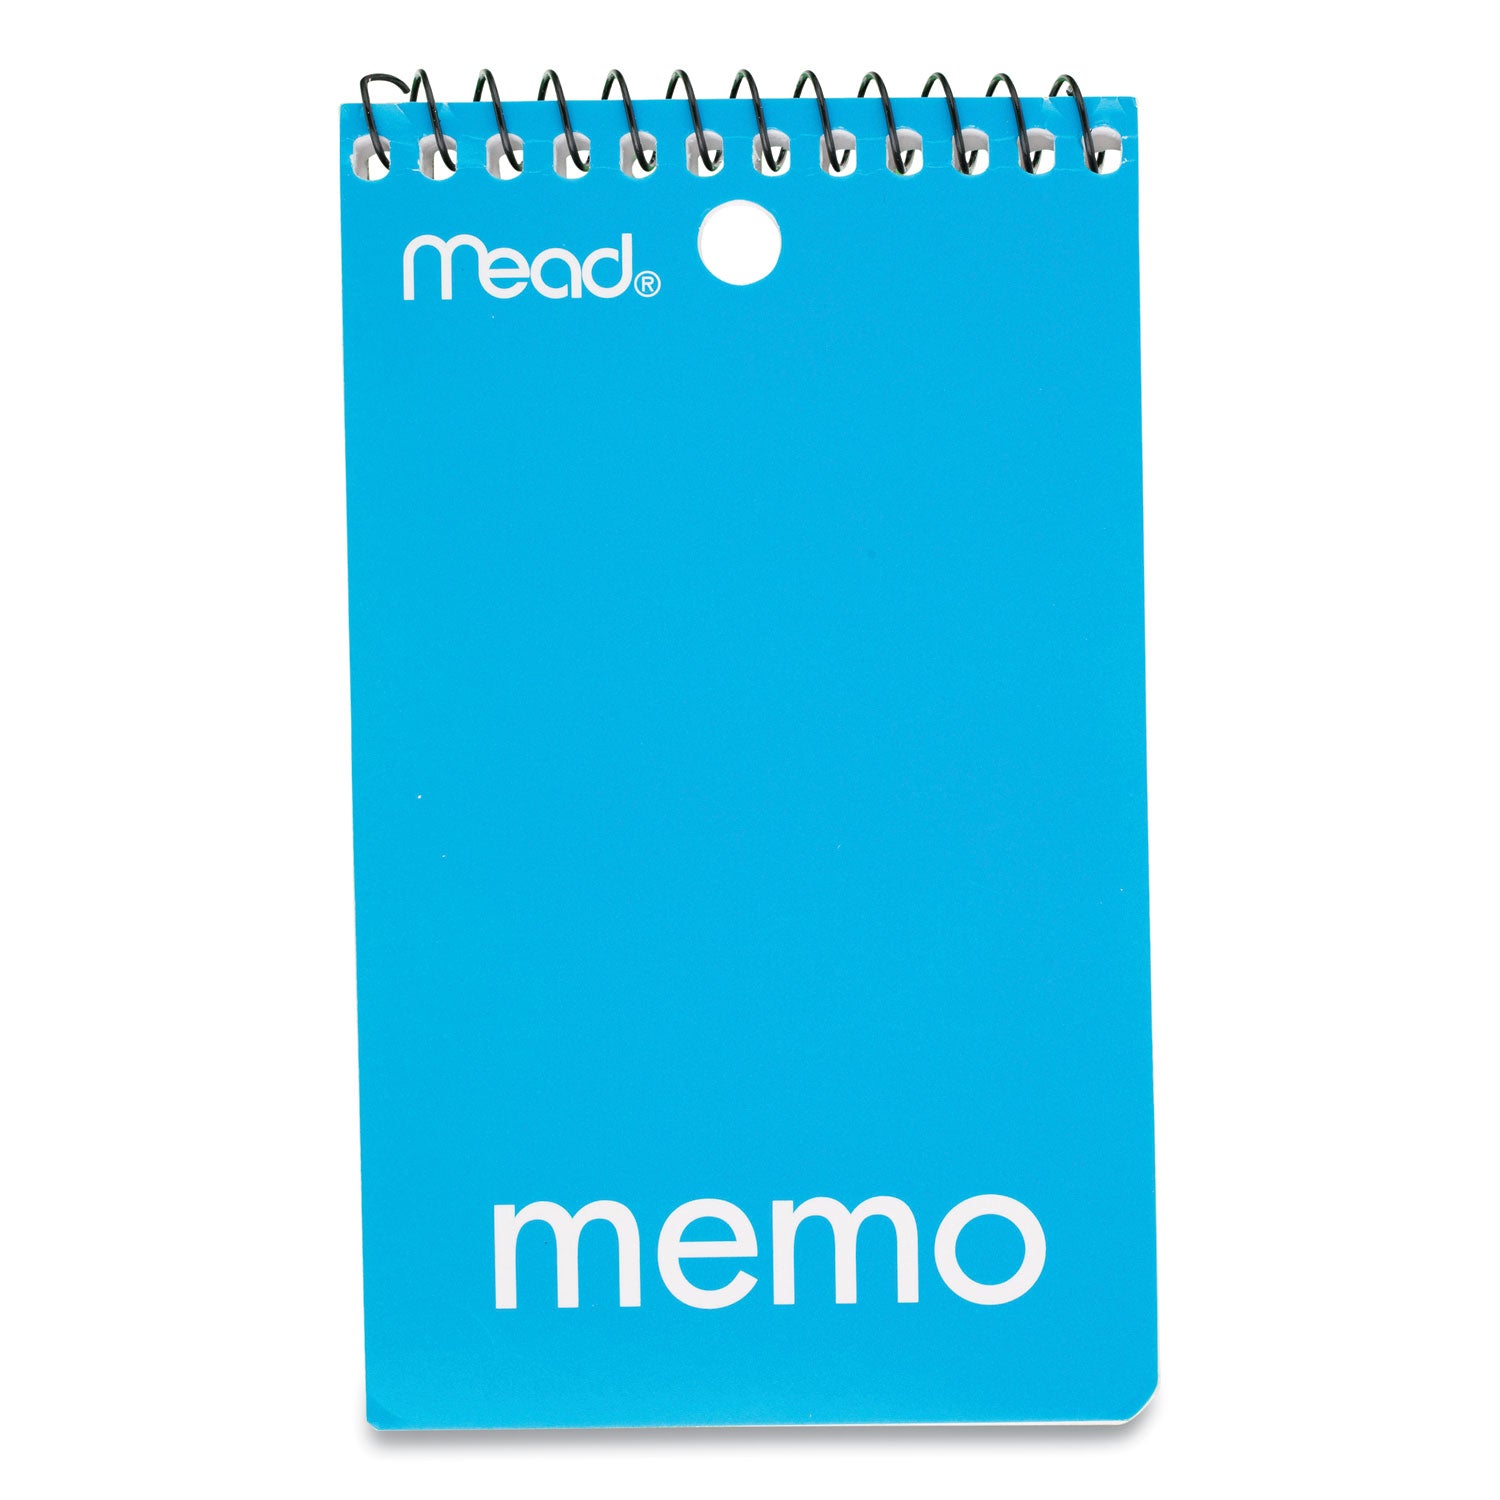 Wirebound Memo Pad with Wall-Hanger Eyelet, Medium/College Rule, Randomly Assorted Cover Colors, 60 White 3 x 5 Sheets - 